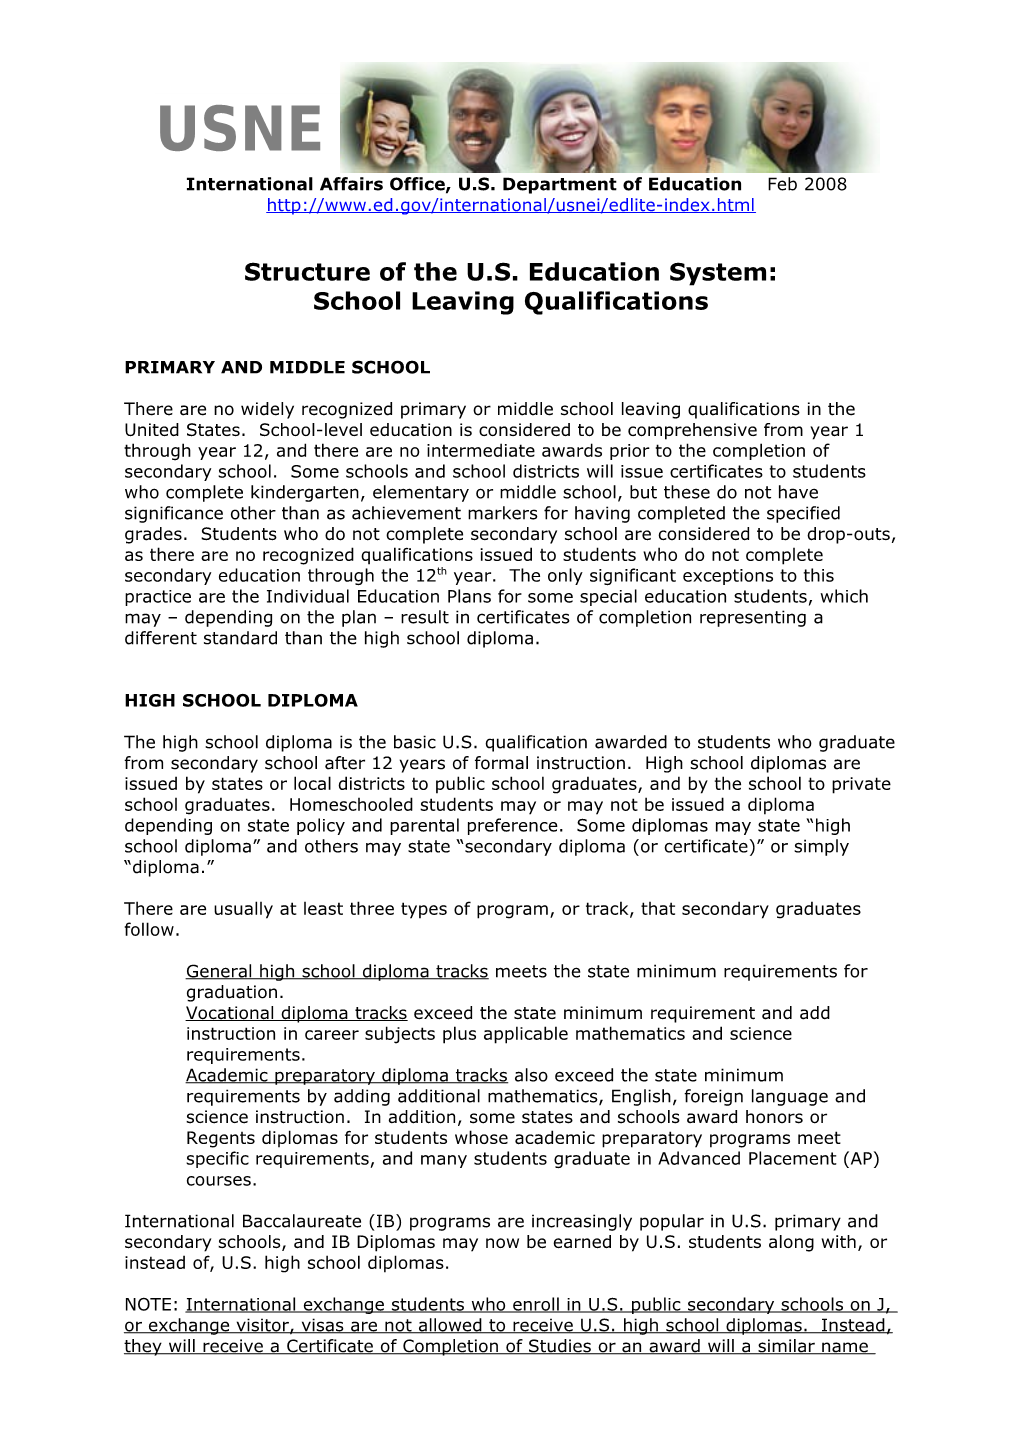 Structure of the US Education System: Primary and Secondary Qualifications (MS Word)